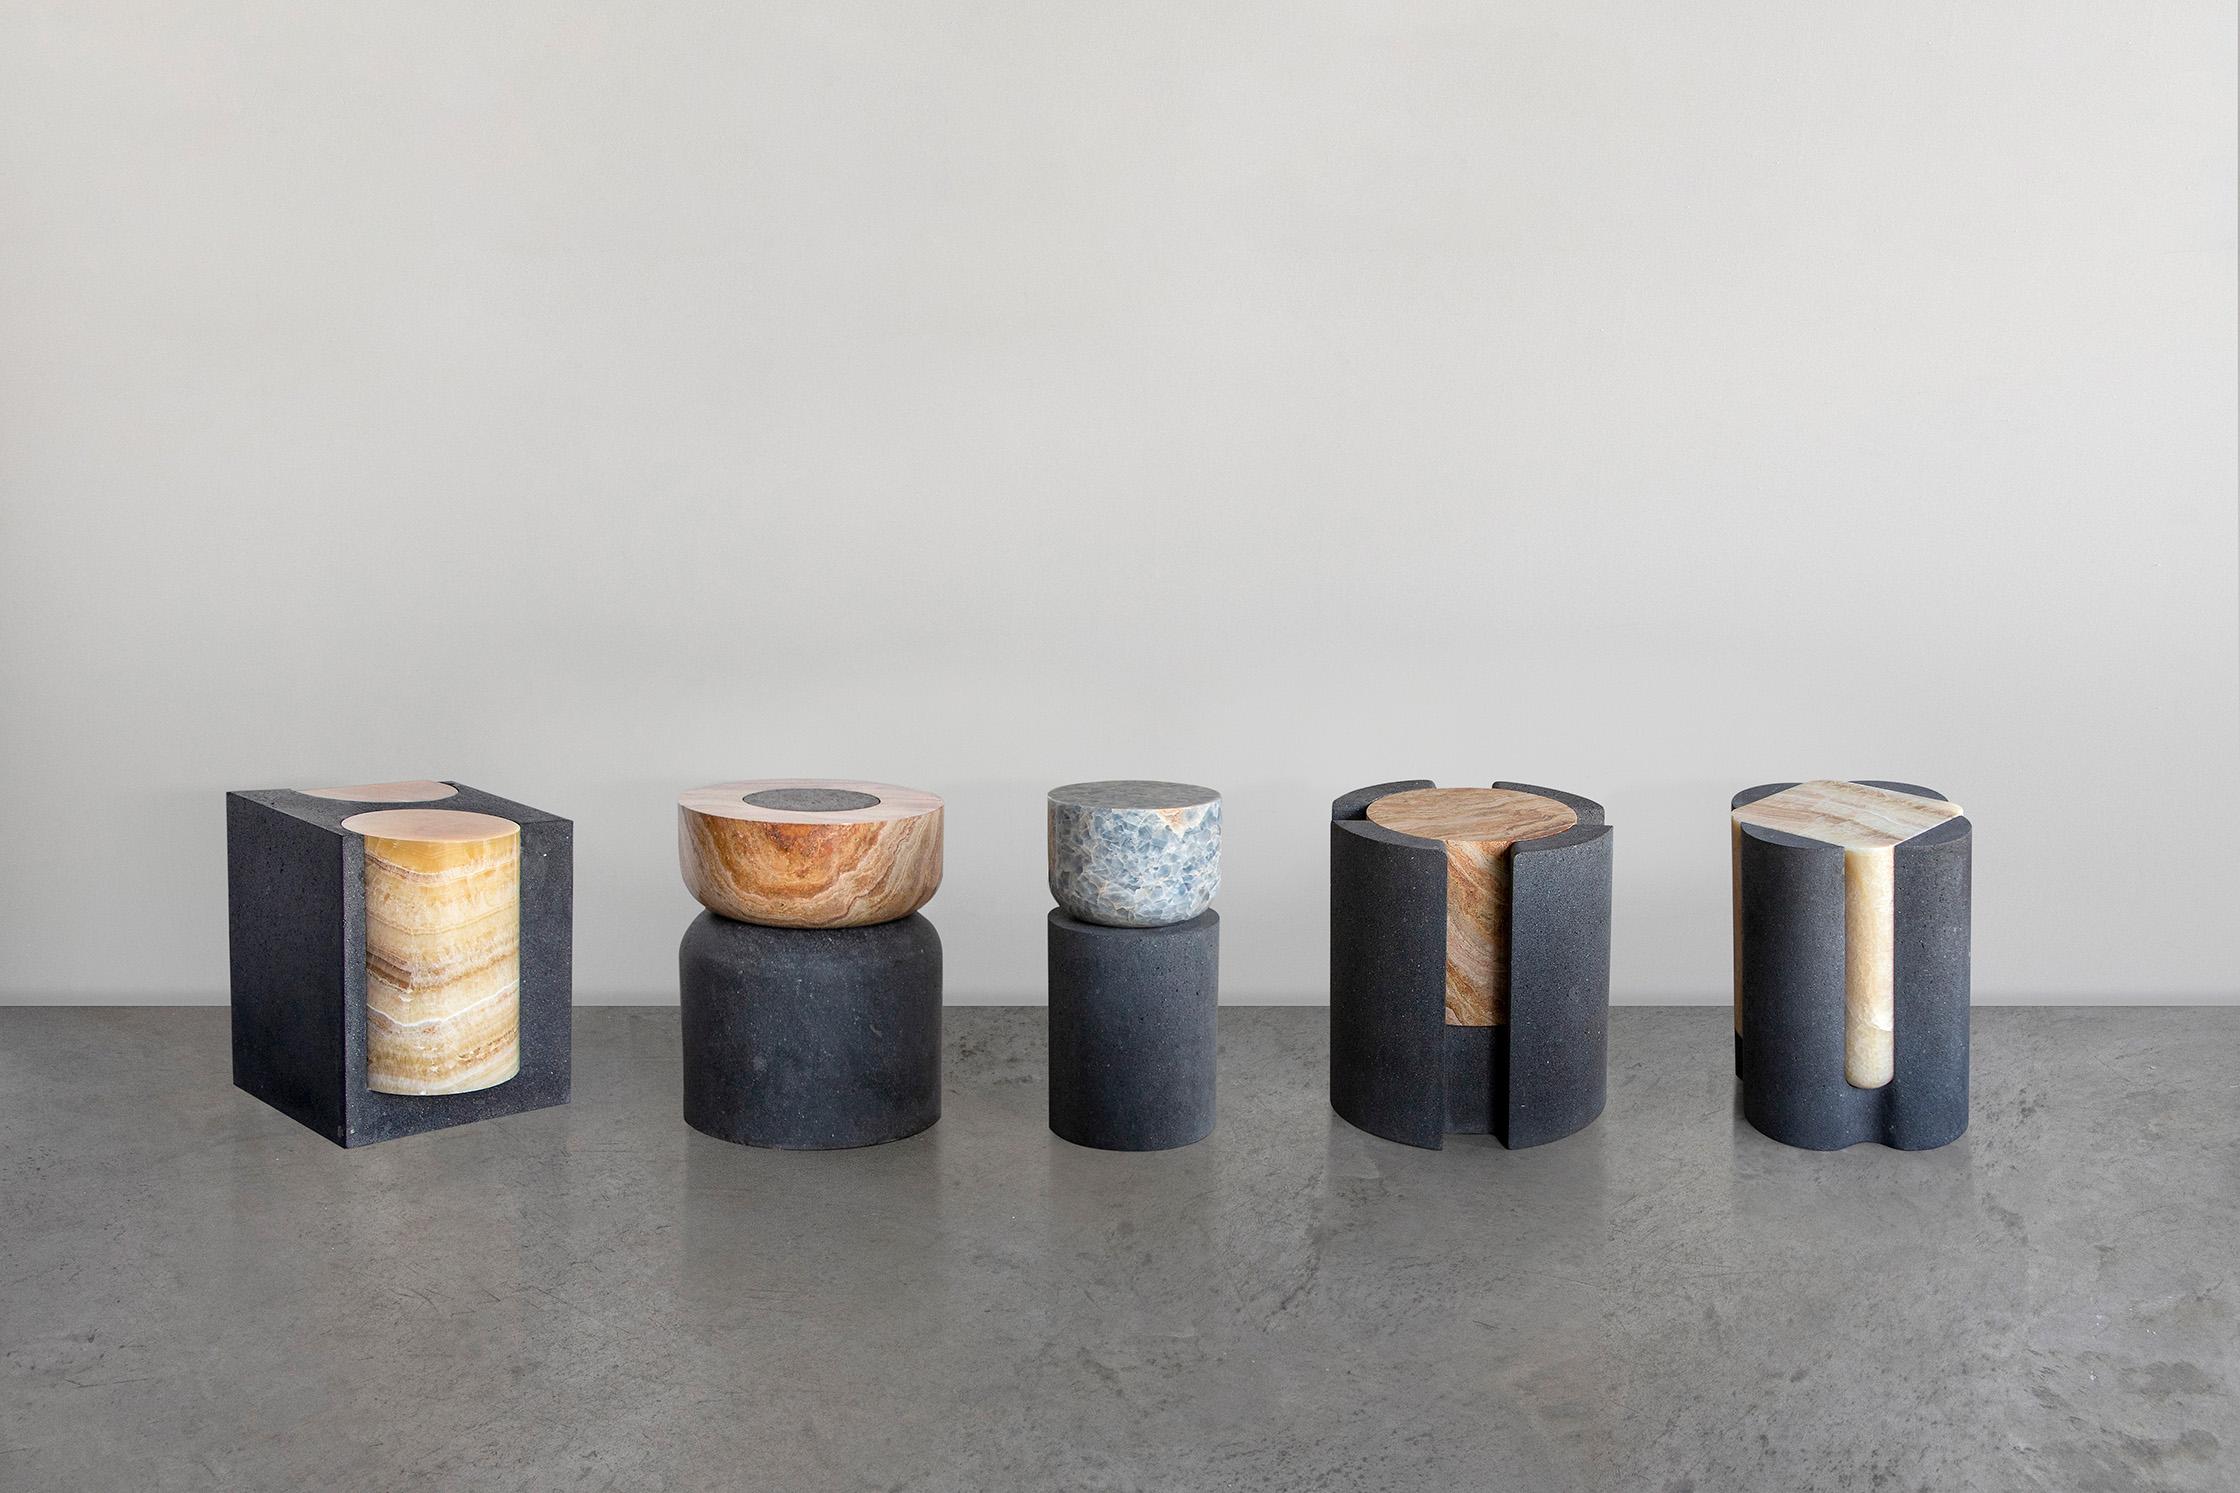 Organic Modern Volcanic Shade IV Stool/Table by Sten Studio, Represented by Tuleste Factory